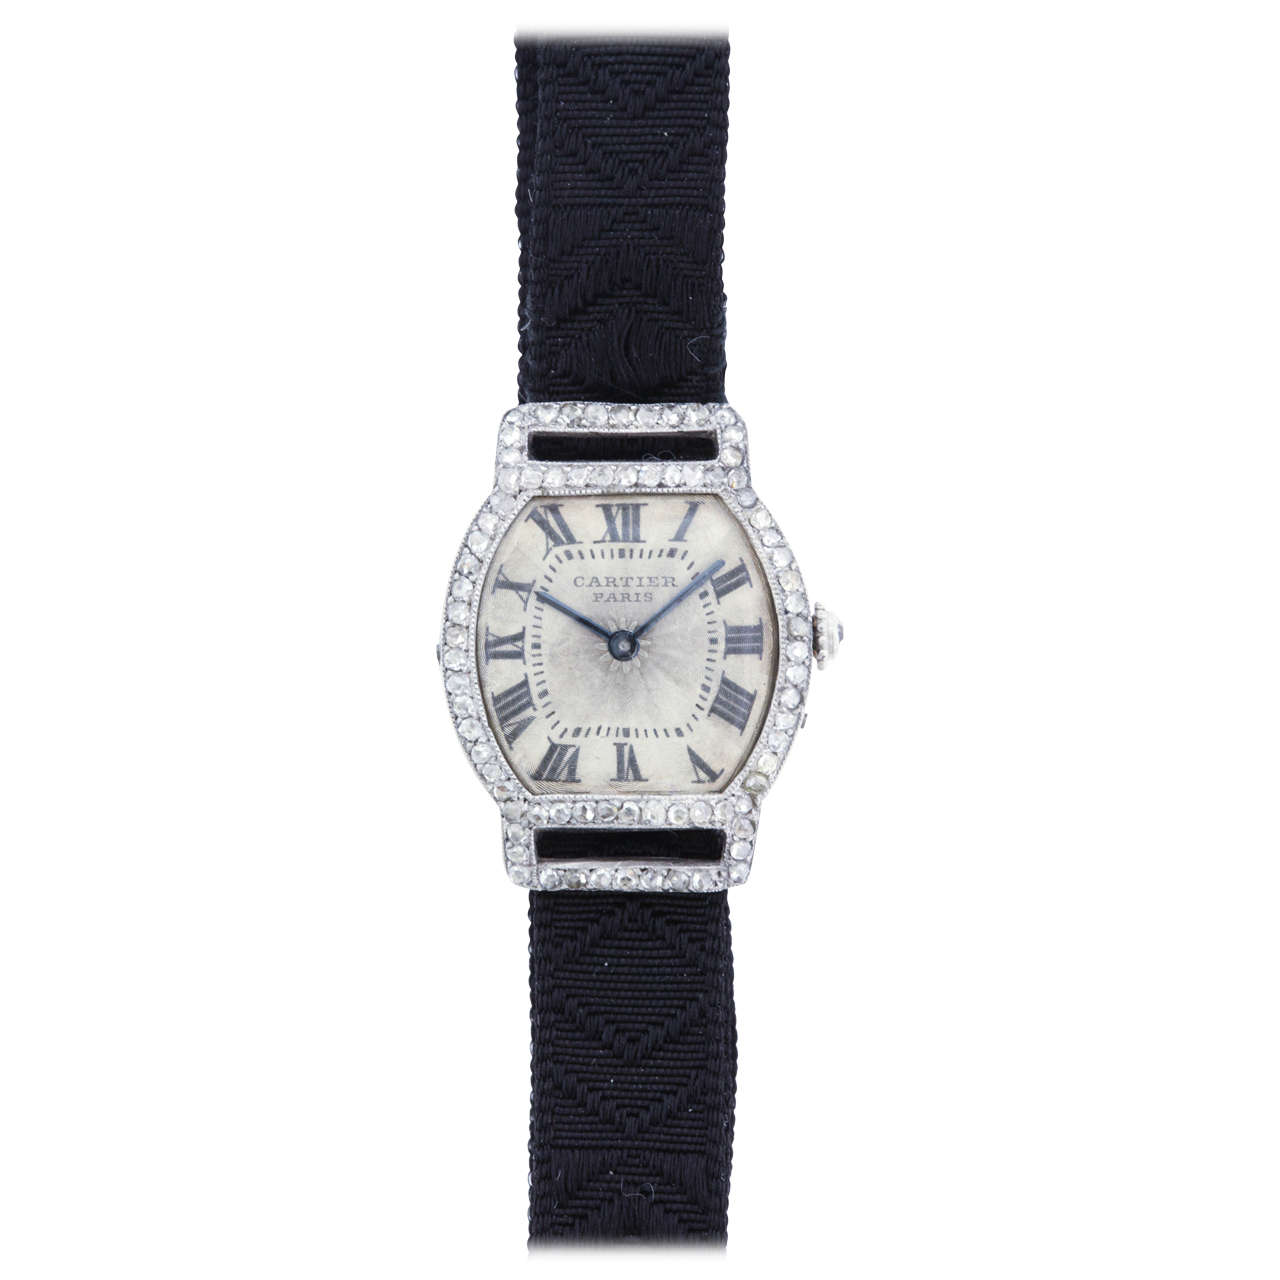 Rare Cartier Watch - 68 For Sale on 1stDibs | rare cartier watches 